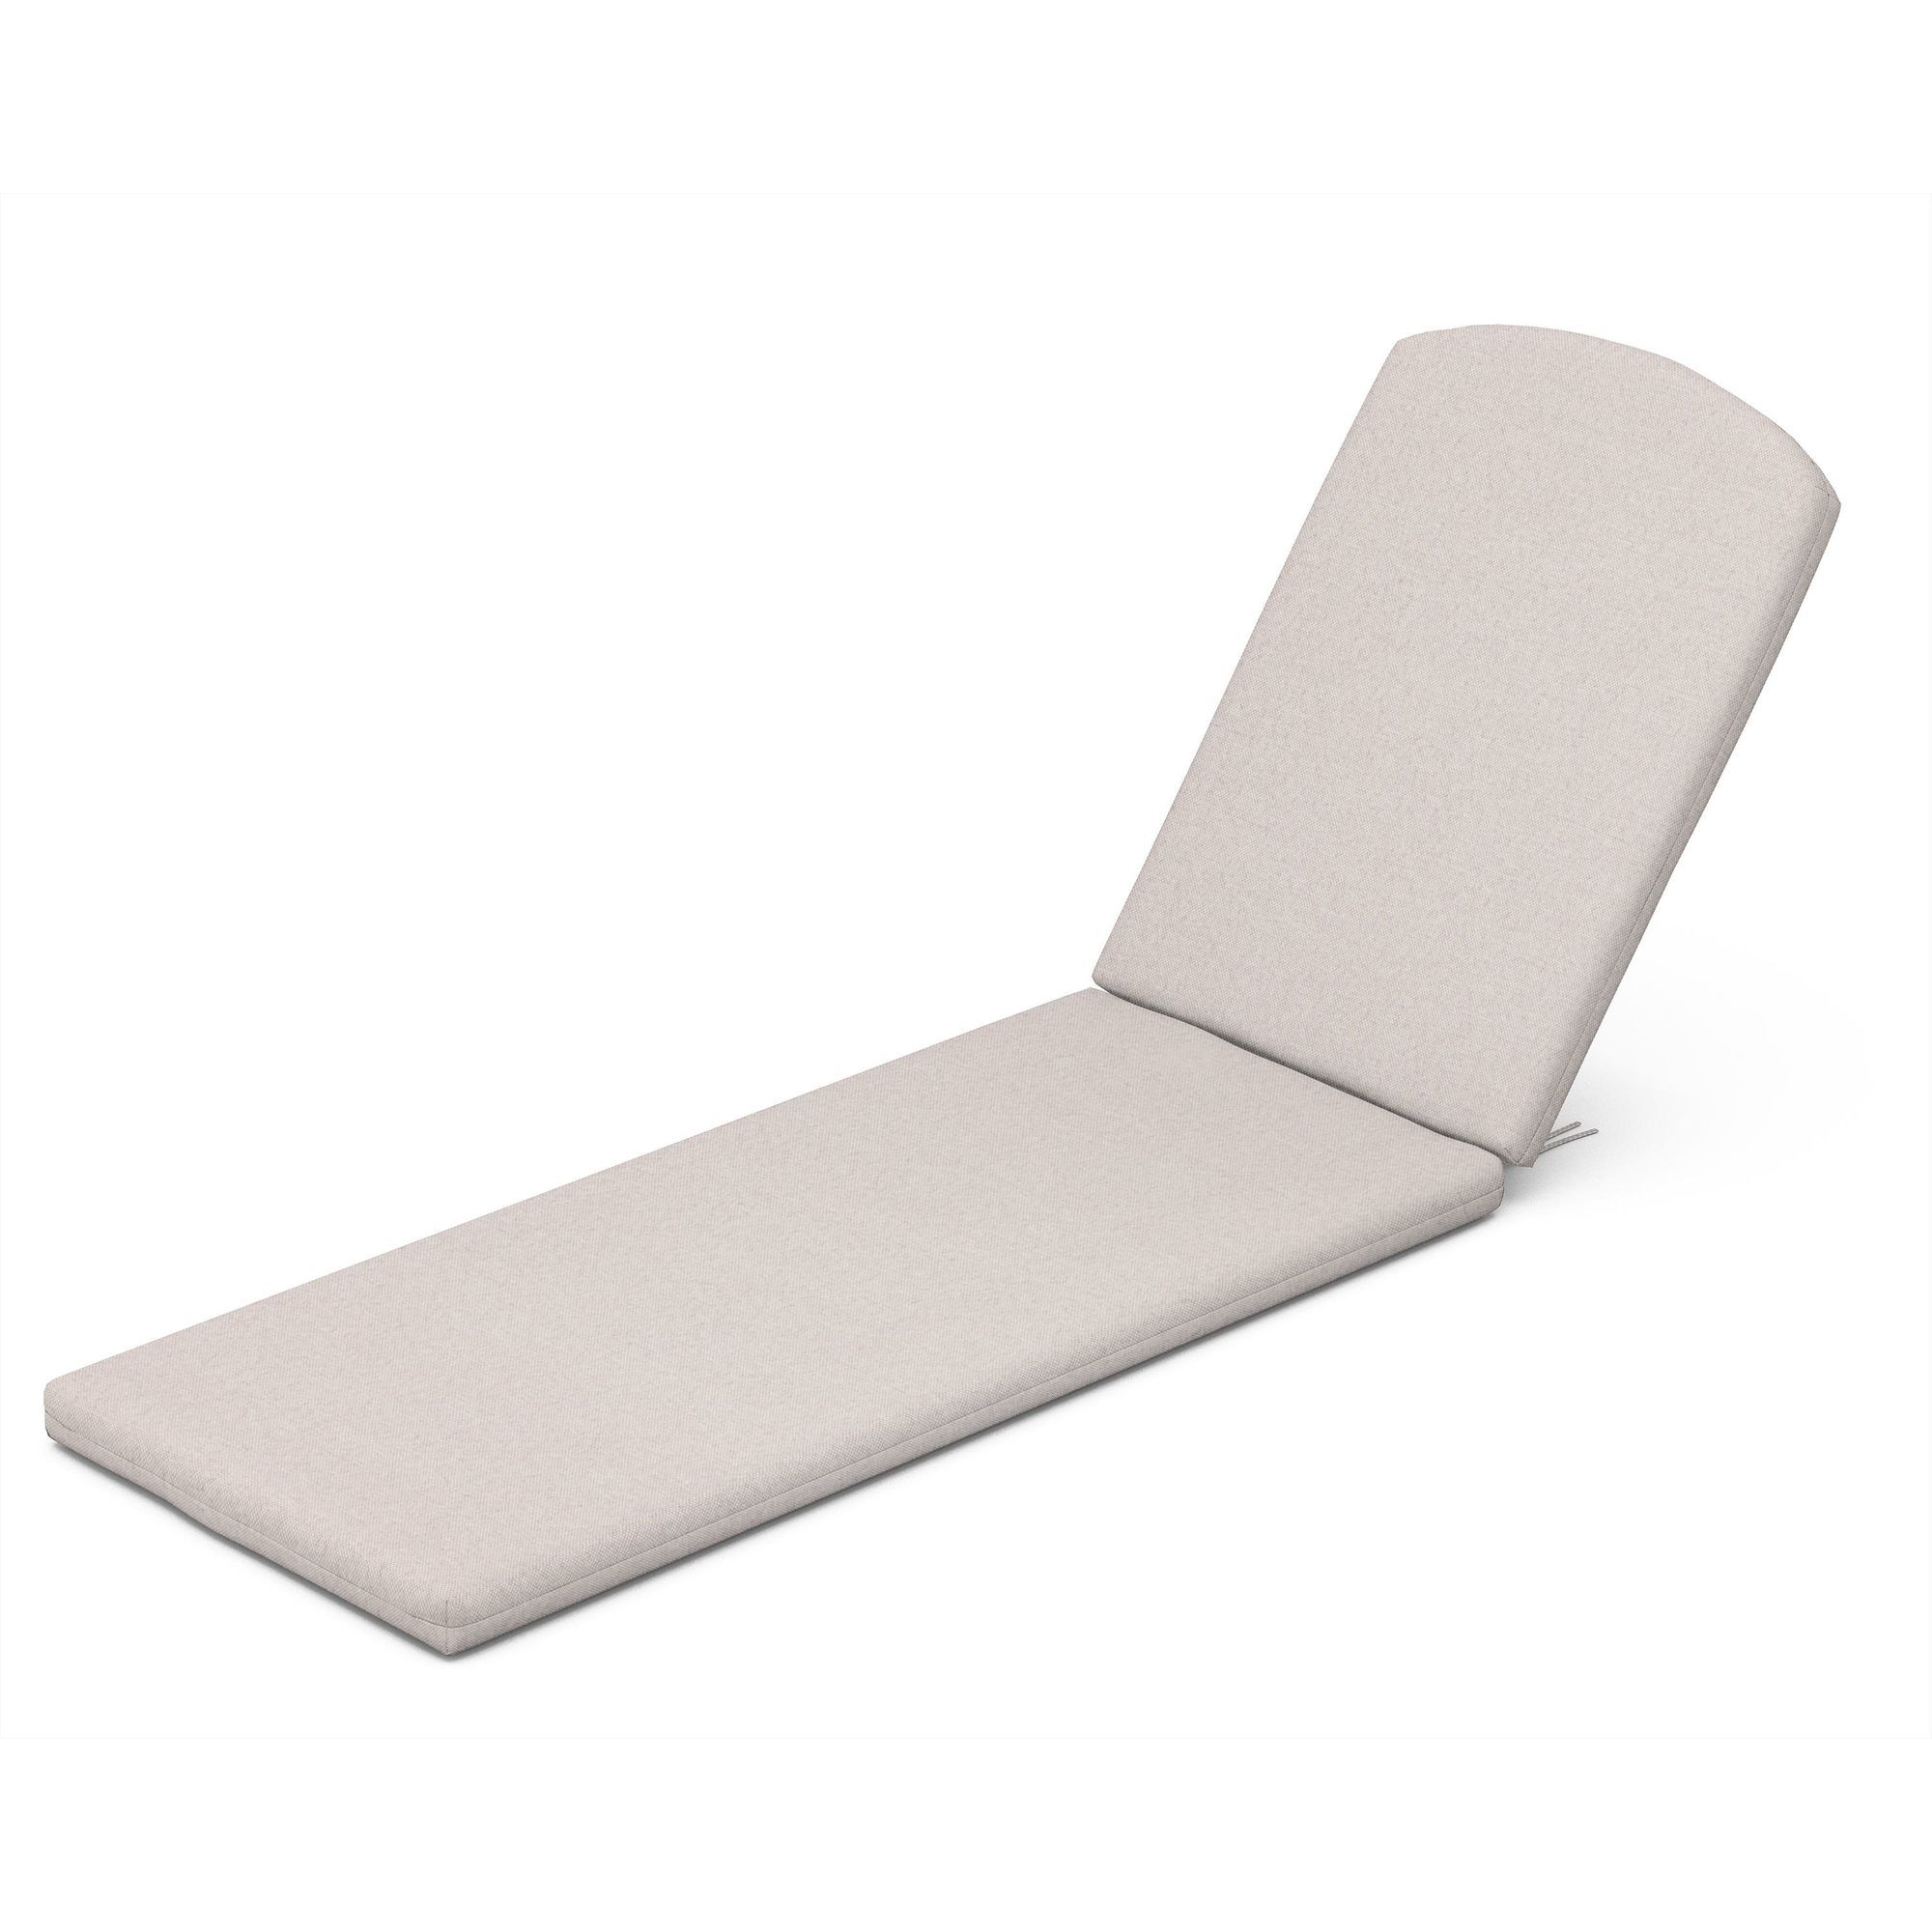 https://cdn.polywood.com/renders/145999/Chaise-Slighty-Round-Top-Seat-Cushion.jpg?fit=fill&fill=solid&w=2000&h=2000